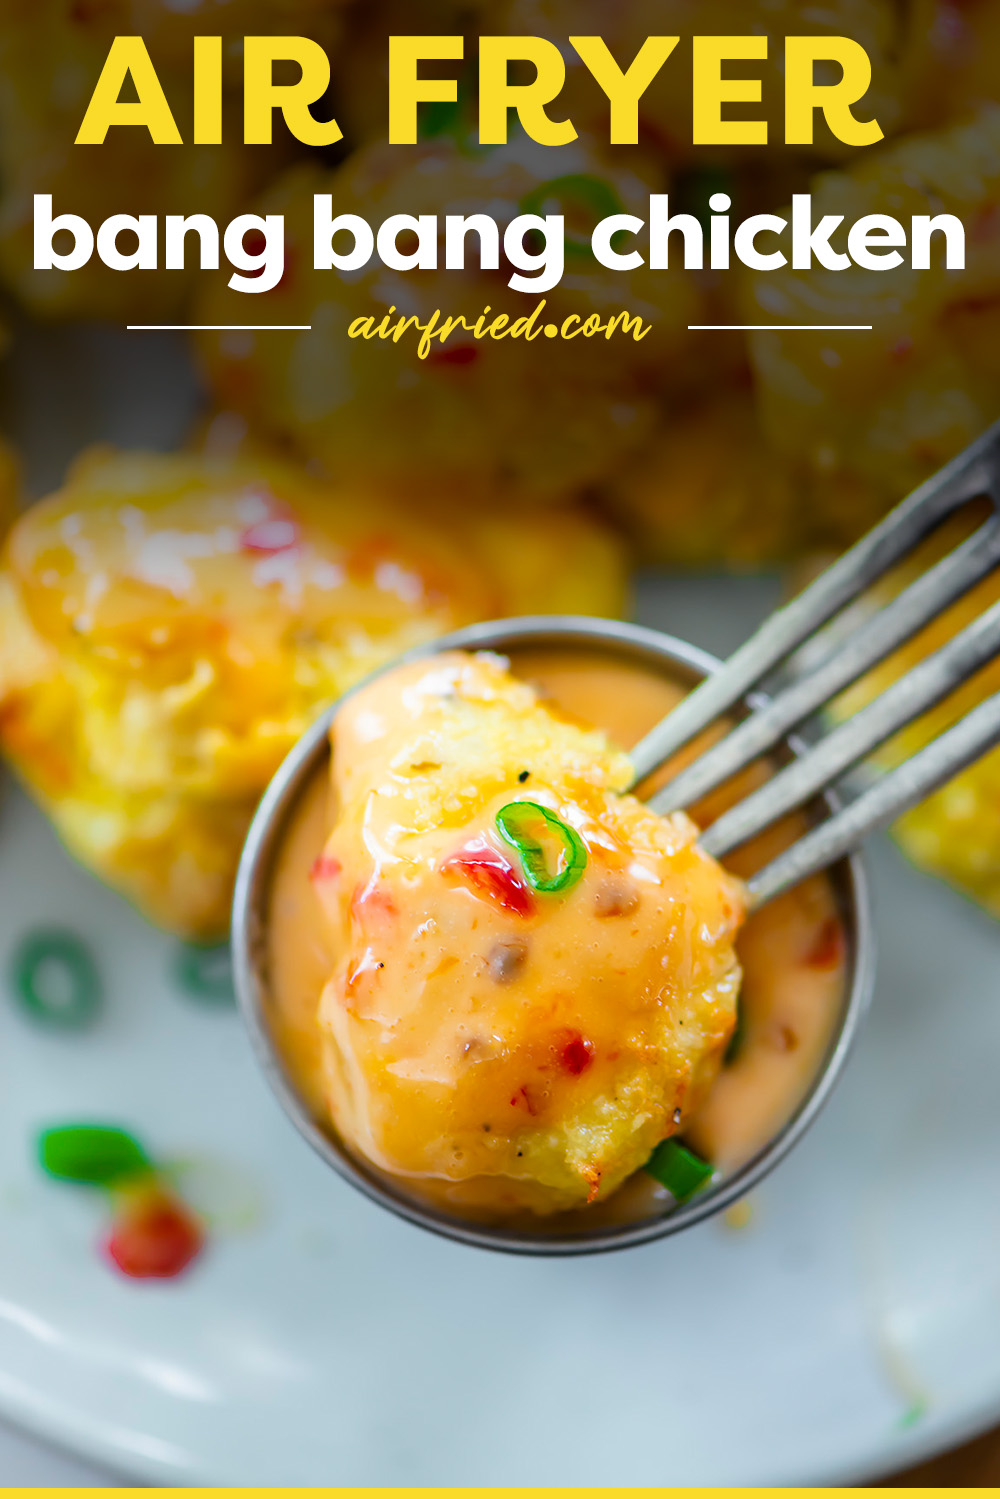 We are loving this bang bang chicken recipe!  We cook our crispy chicken in the air fryer and make a homemade bang bang sauce for exceptional flavor!